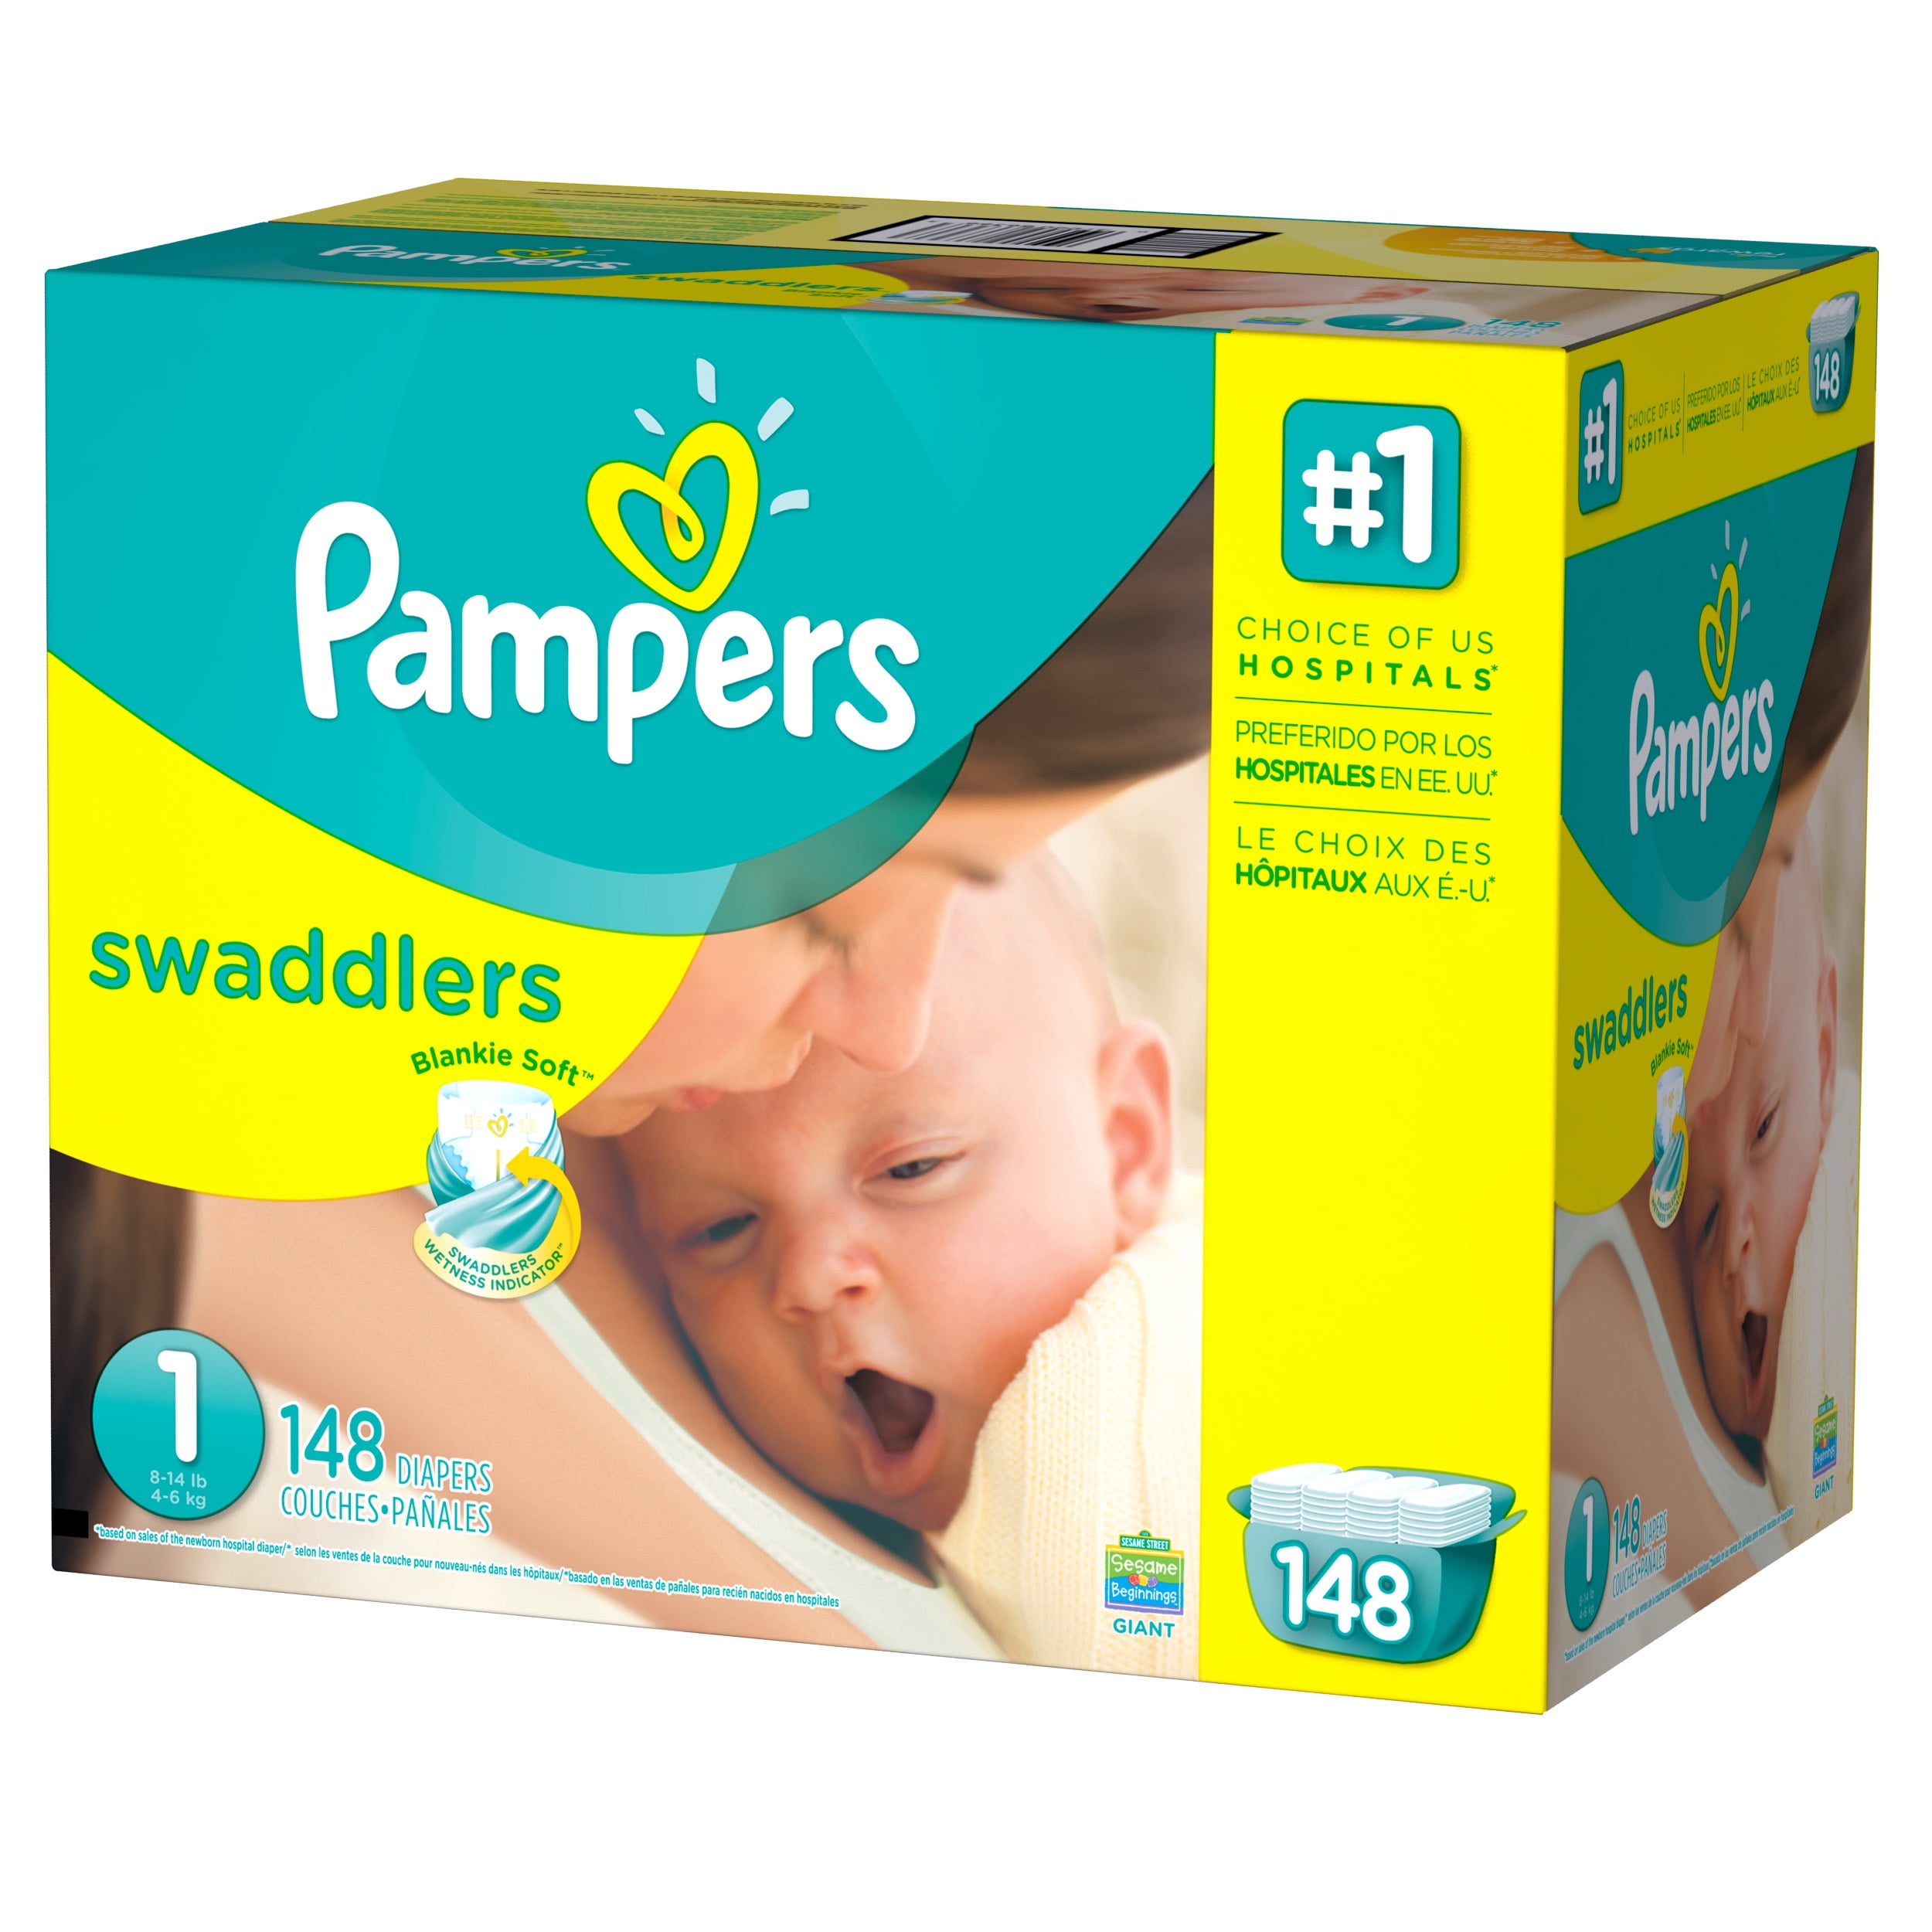 pampers swaddlers walmart size 1